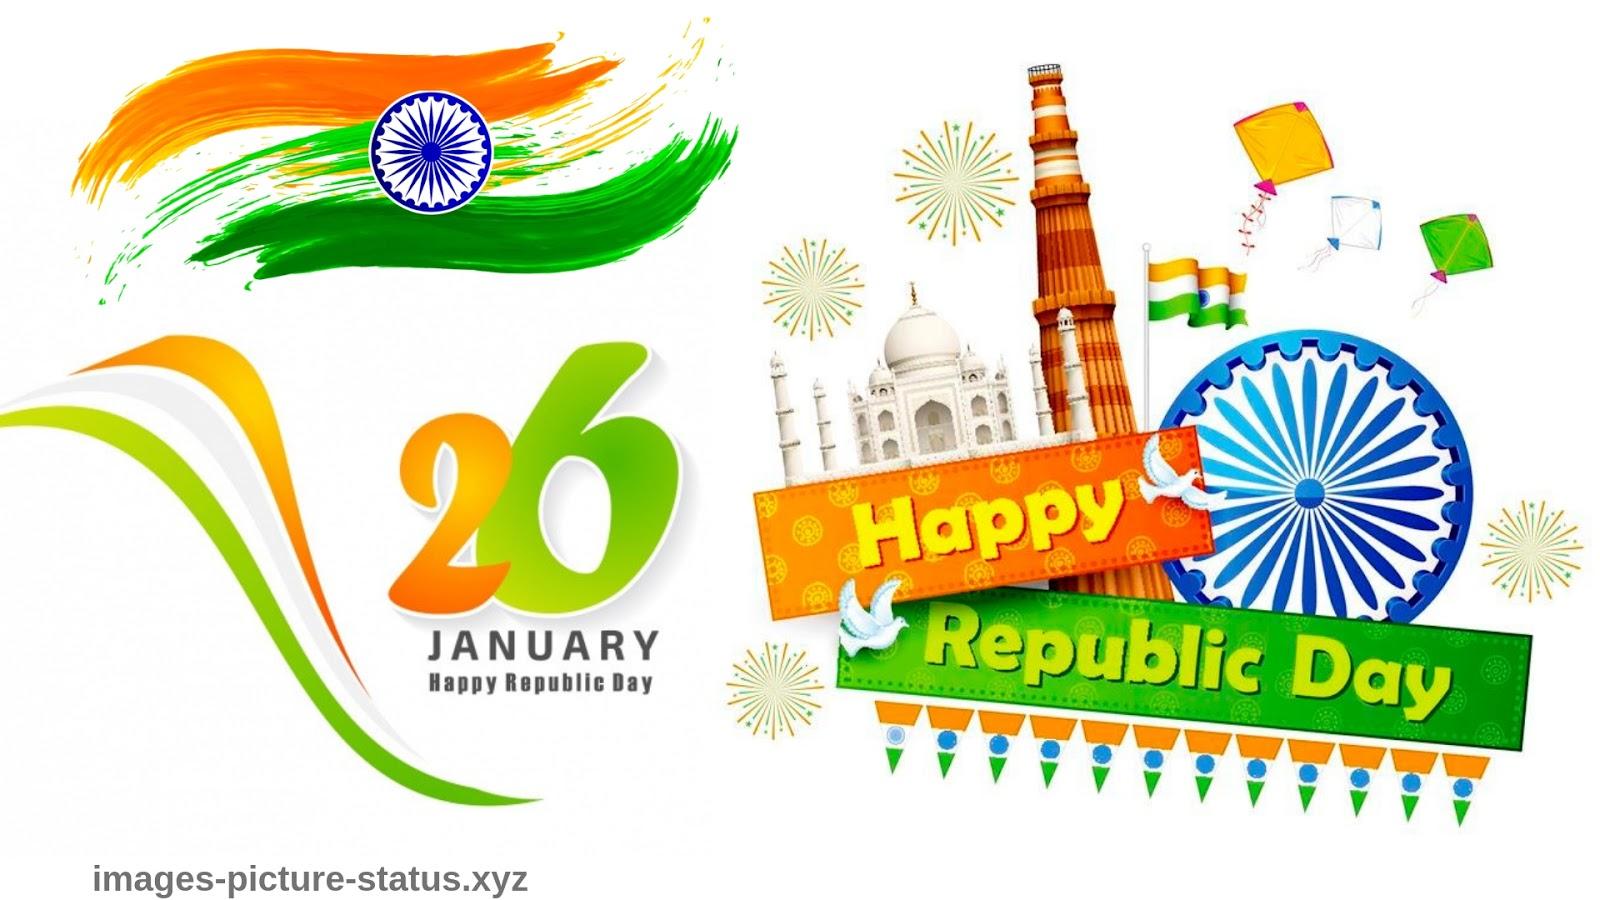 Happy Republic Day 2019 Wishes HD Image Wallpaper Quotes